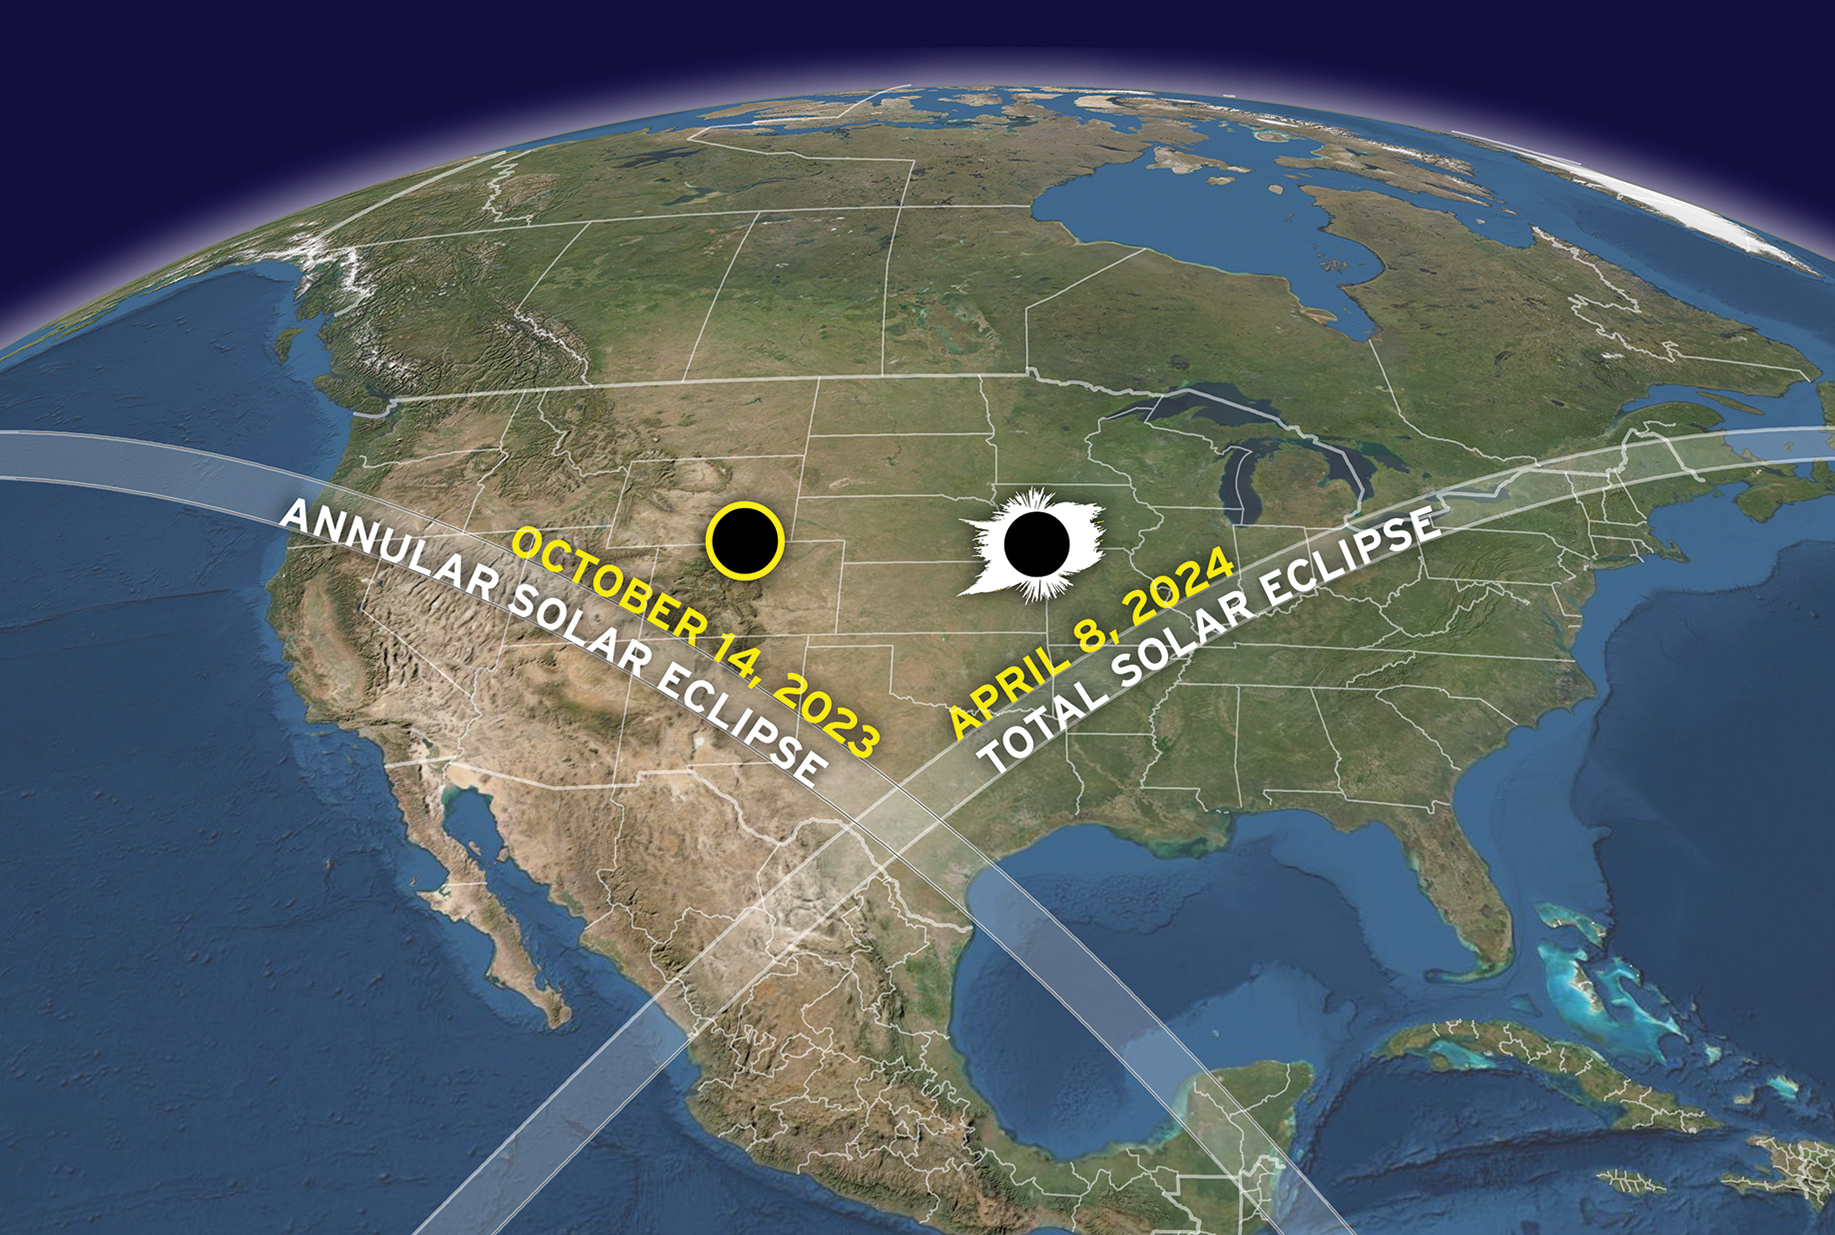 A map of the paths of the 2023 and 2024 solar eclipses over North America